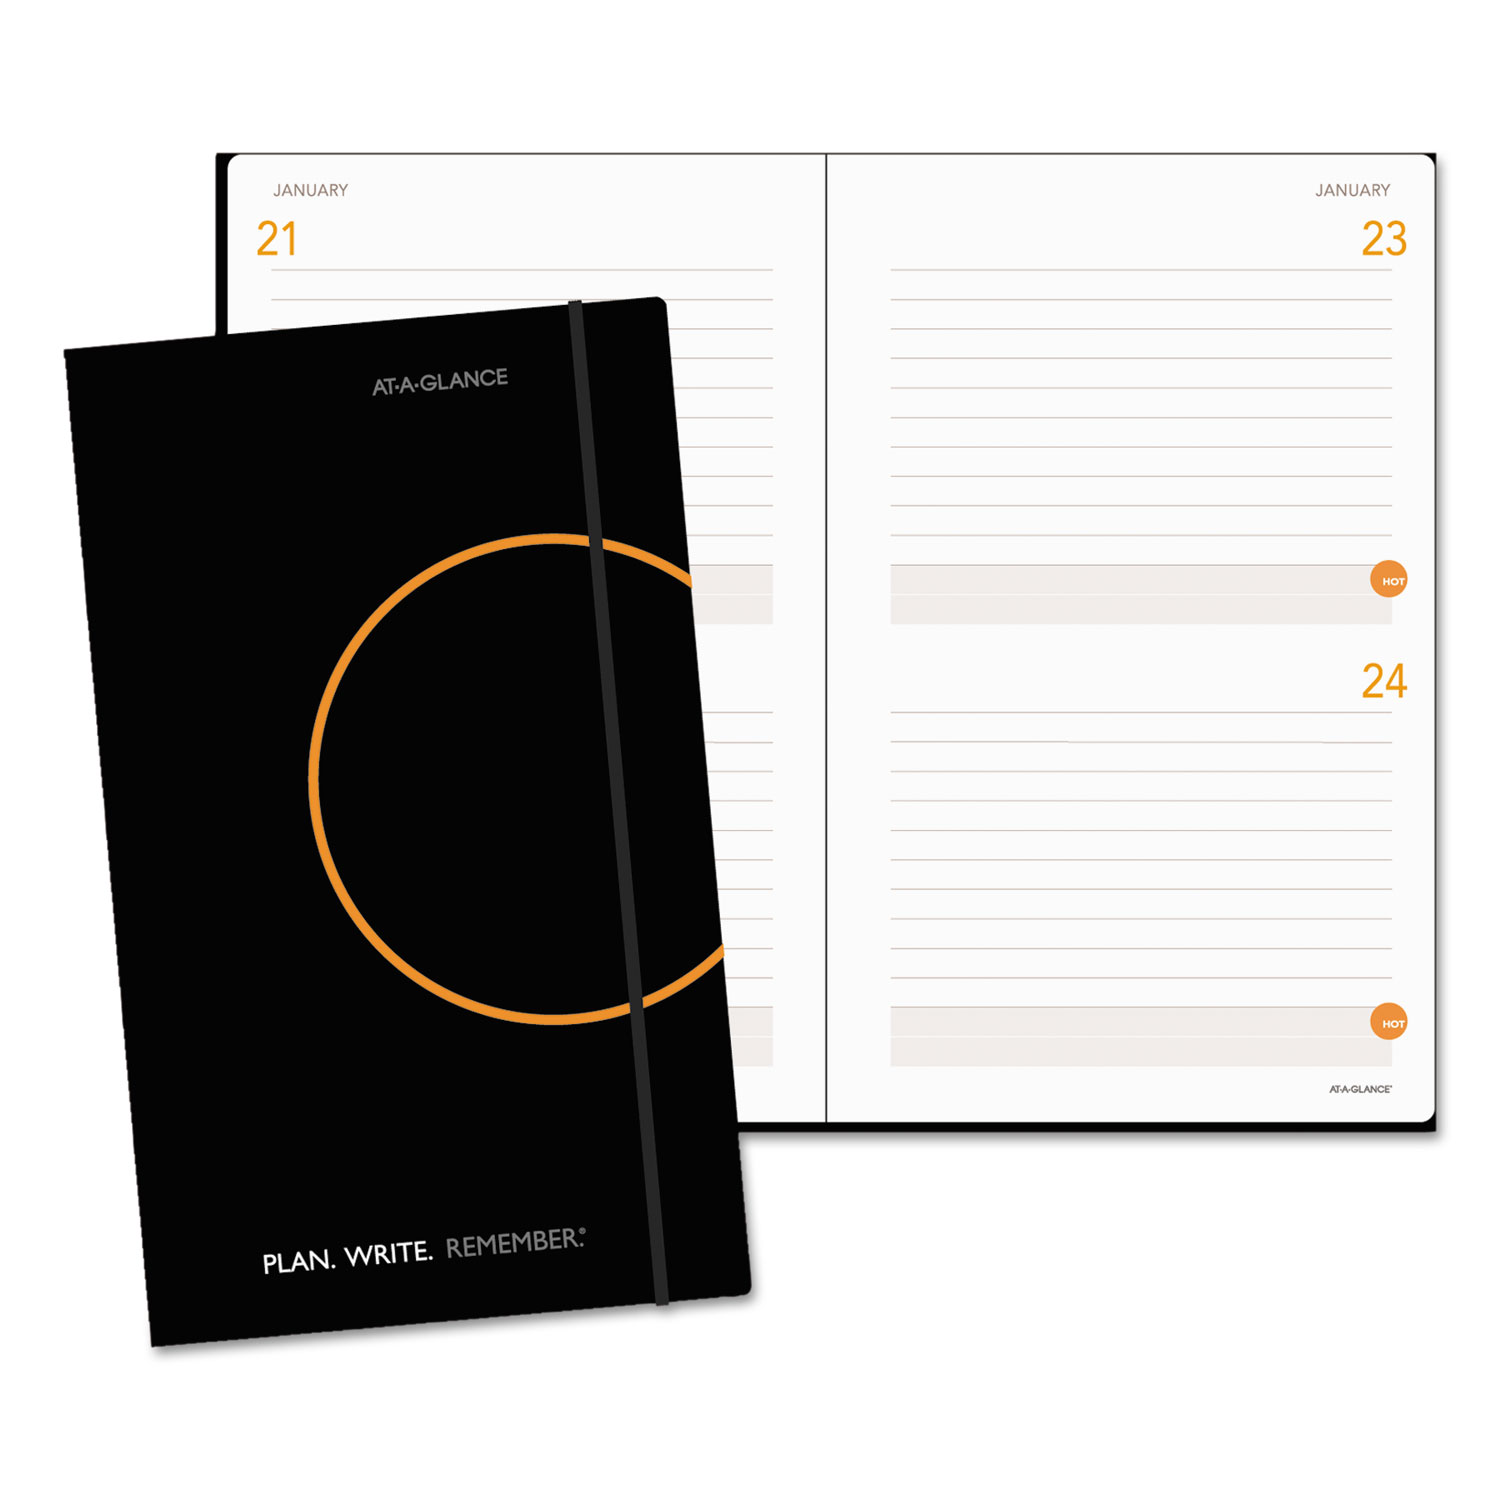  AT-A-GLANCE 80612105 Plan. Write. Remember. Planning Notebook Two Days Per Page, 8 1/4 x 5, Black (AAG80612105) 